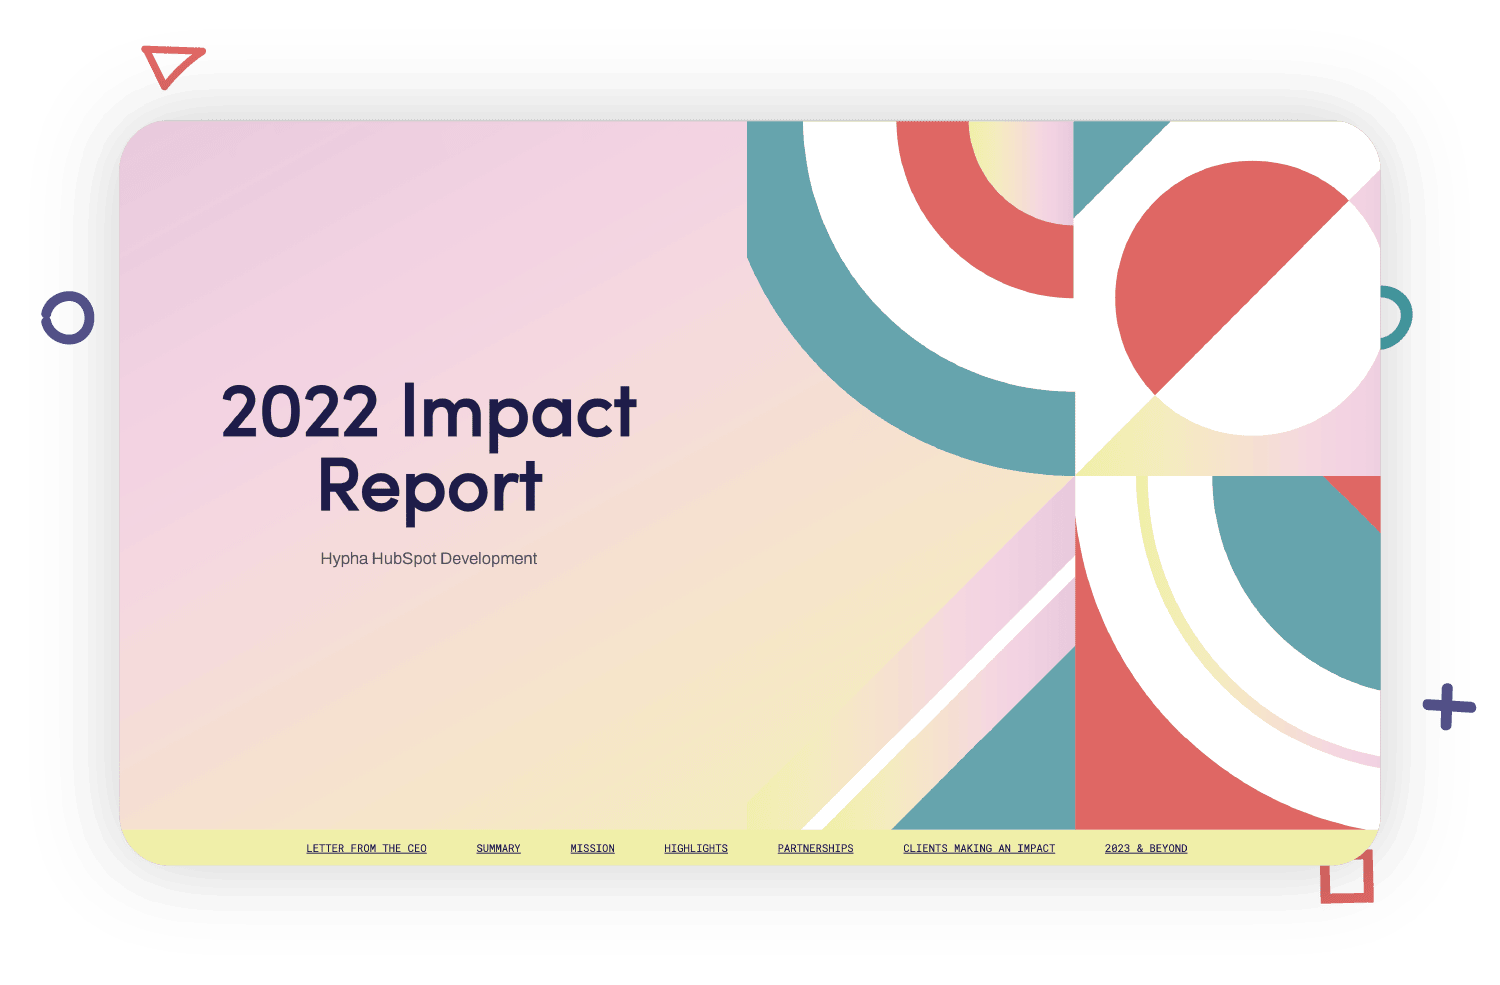 Decorative Impact Report screenshot with abstract shapes